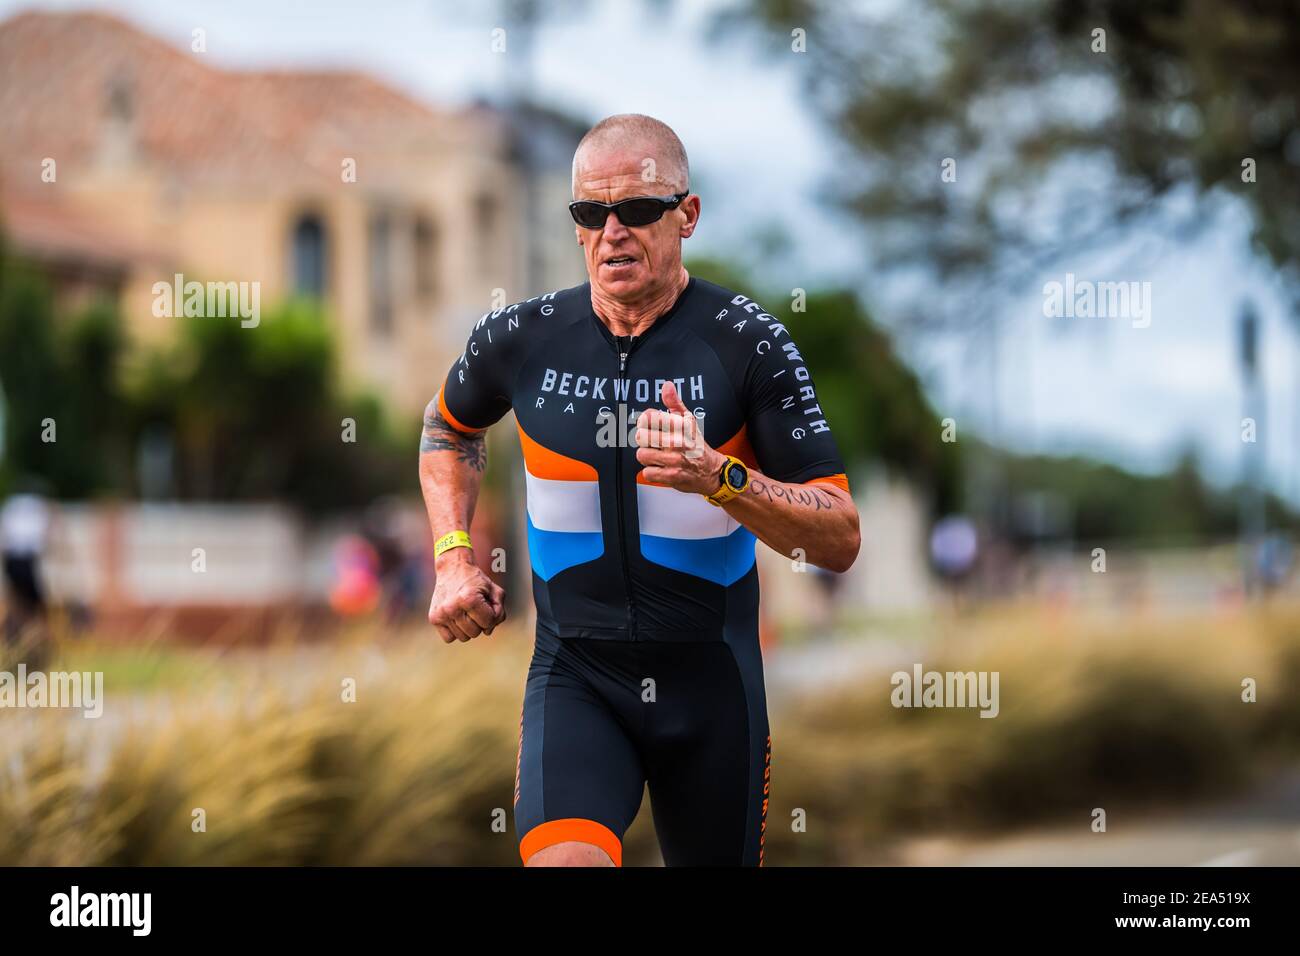 vulkansk Opdatering nuttet Page 11 - Triathlon Series High Resolution Stock Photography and Images -  Alamy